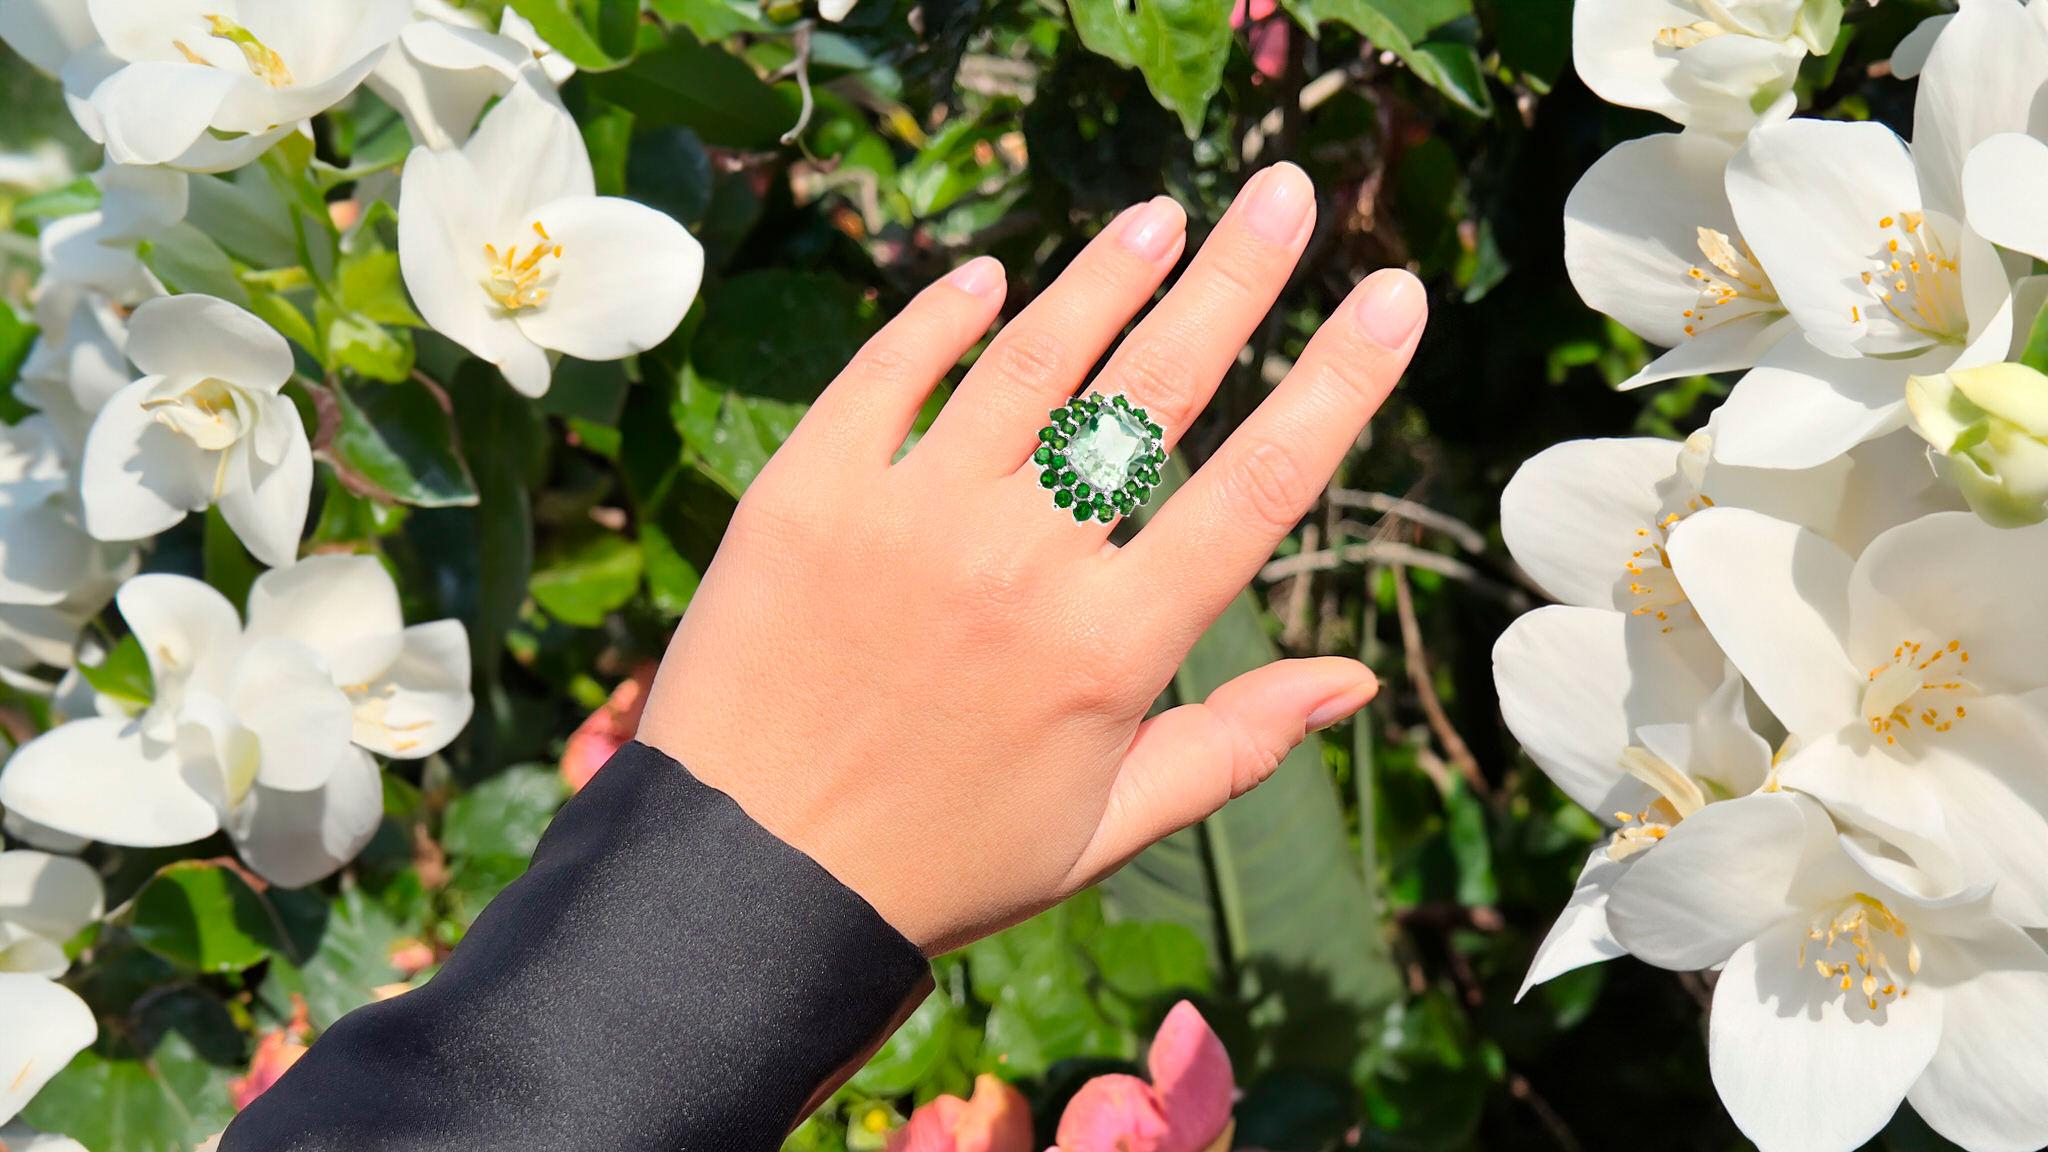 It comes with the Gemological Appraisal by GIA GG/AJP
All Gemstones are Natural
Green Amethyst = 6.85 Carats
21 Chrome Diopsides = 3.05 Carats
Metal: Rhodium Plated Sterling Silver
Ring Size: 6* US
*It can be resized complimentary